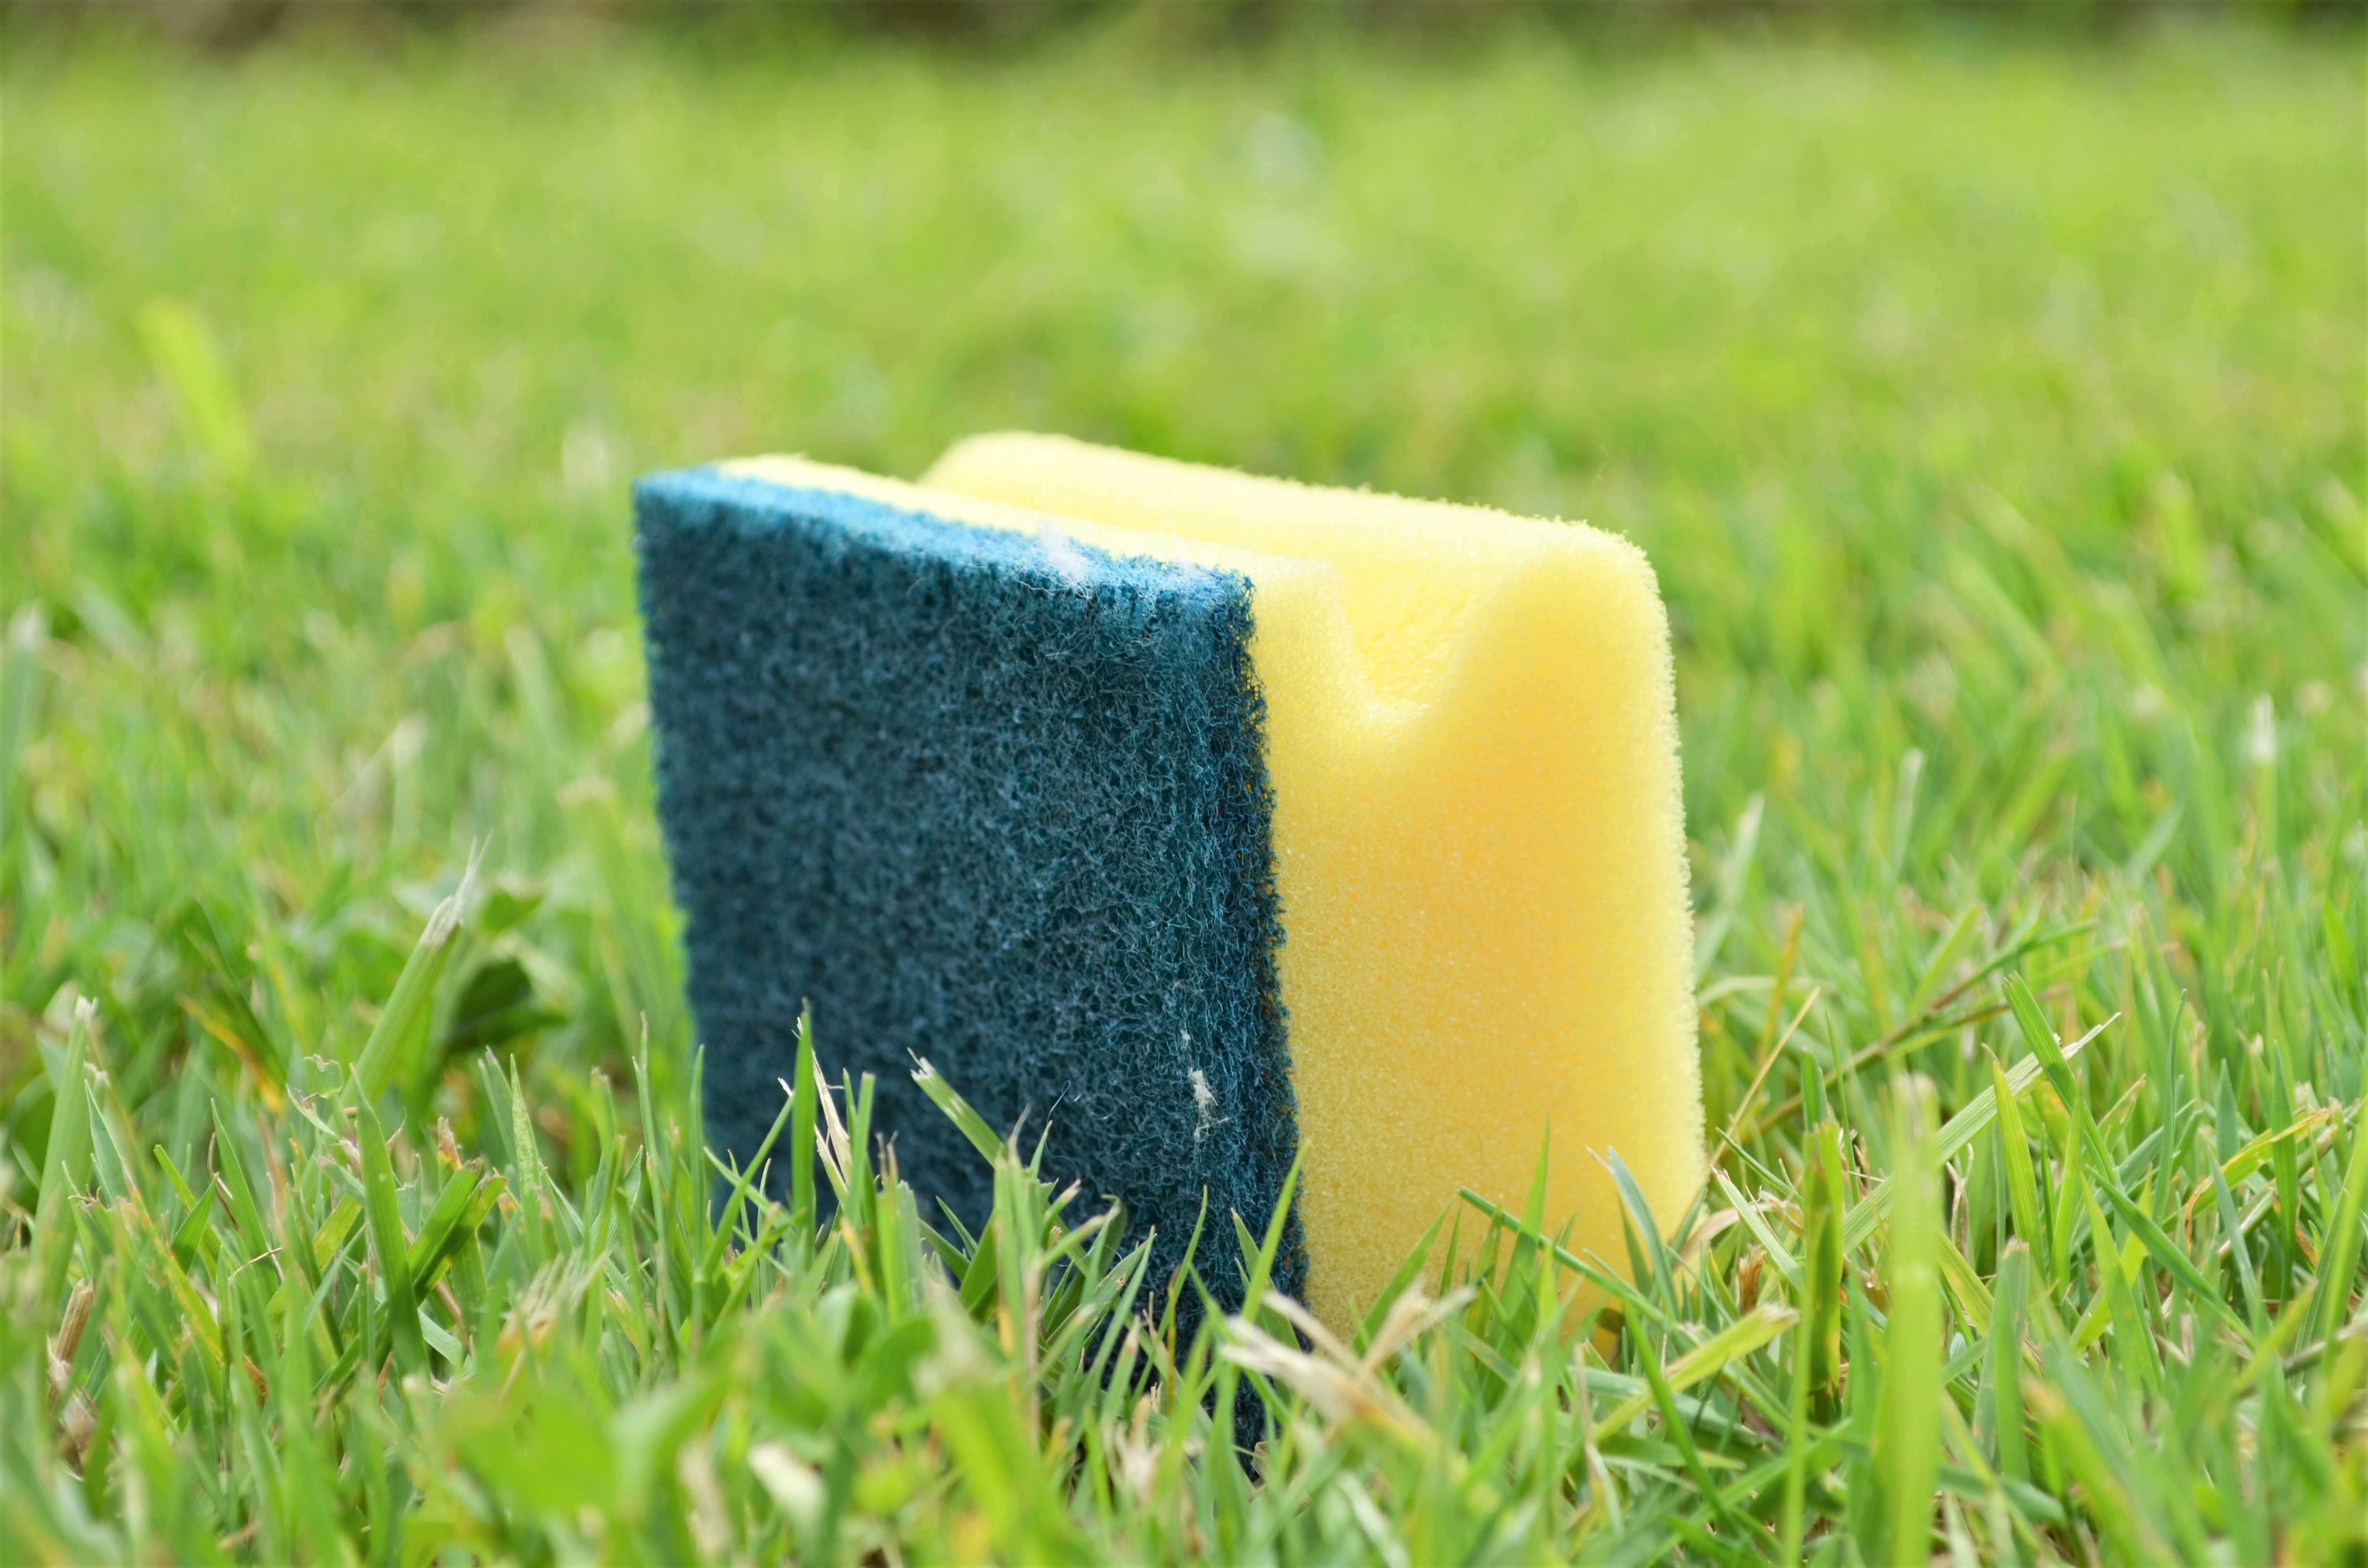 Close up of a sponge on some grass